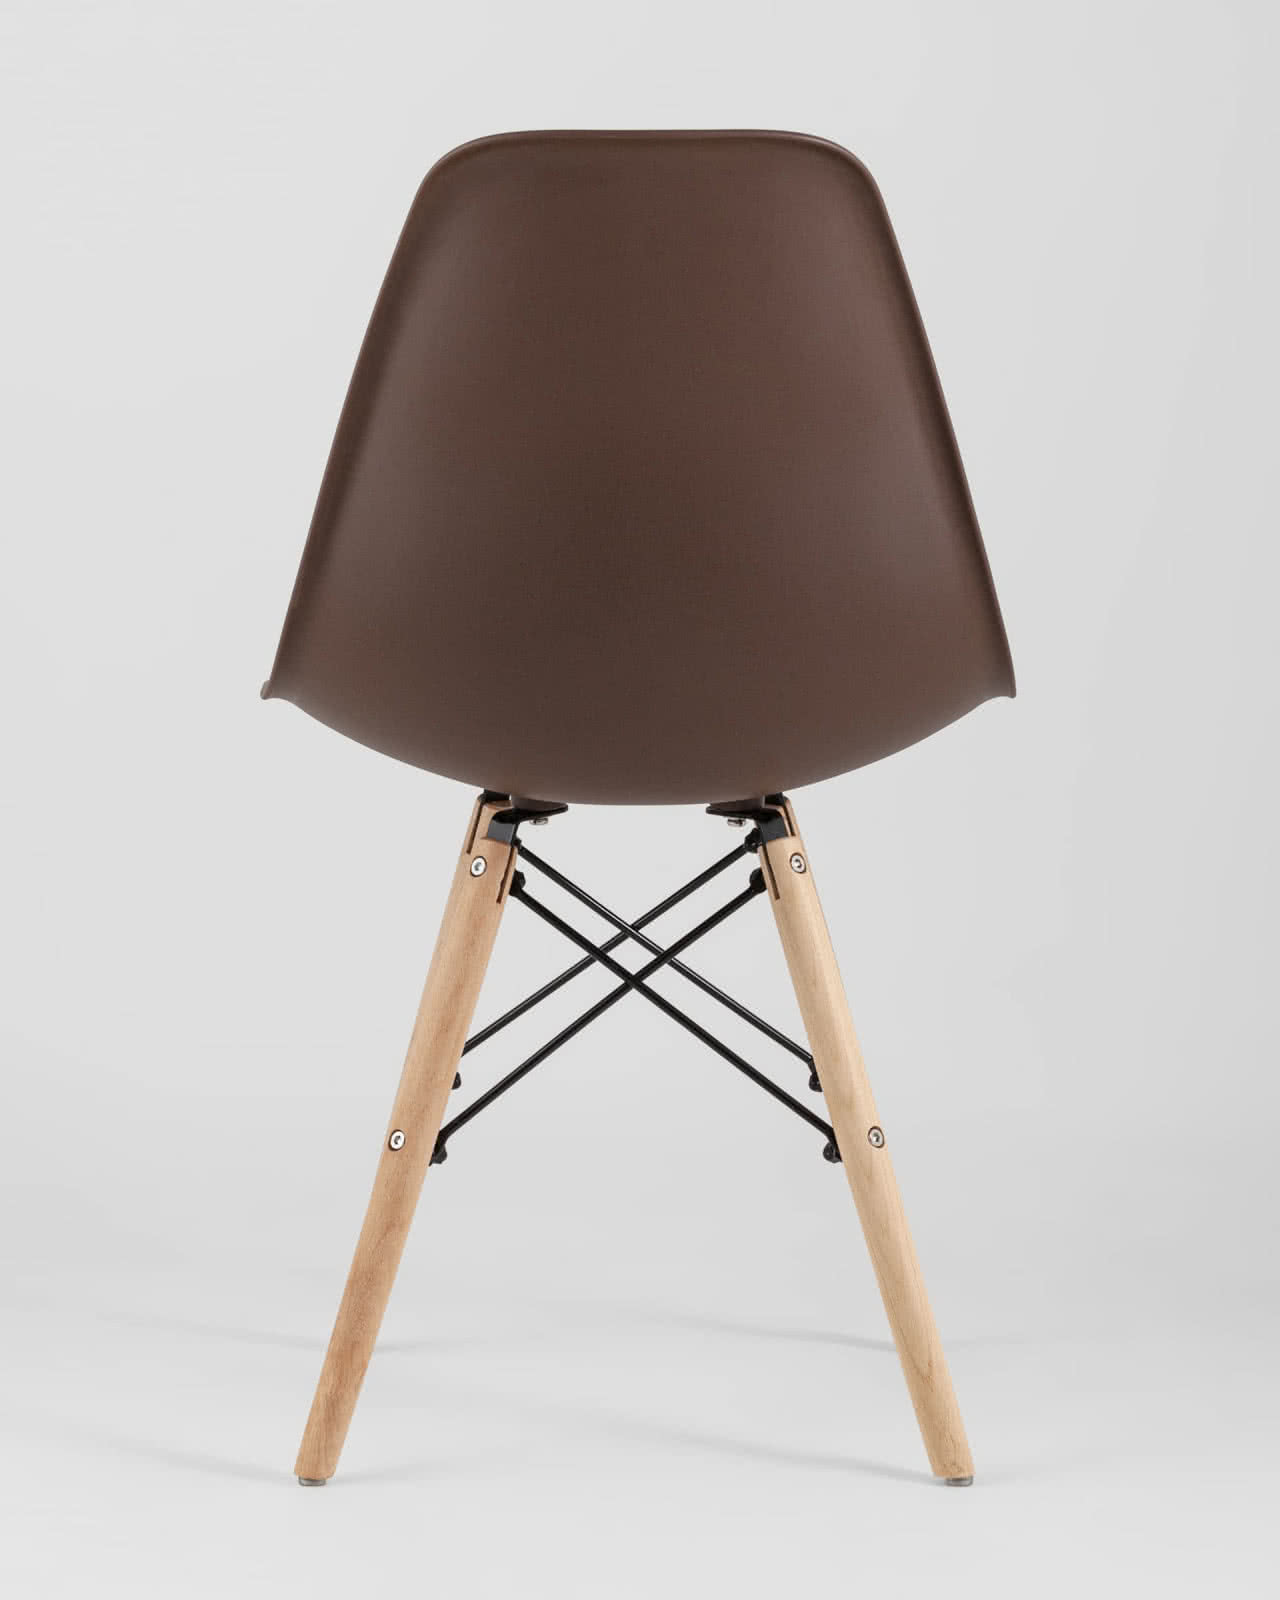  Stool Group Style DSW 